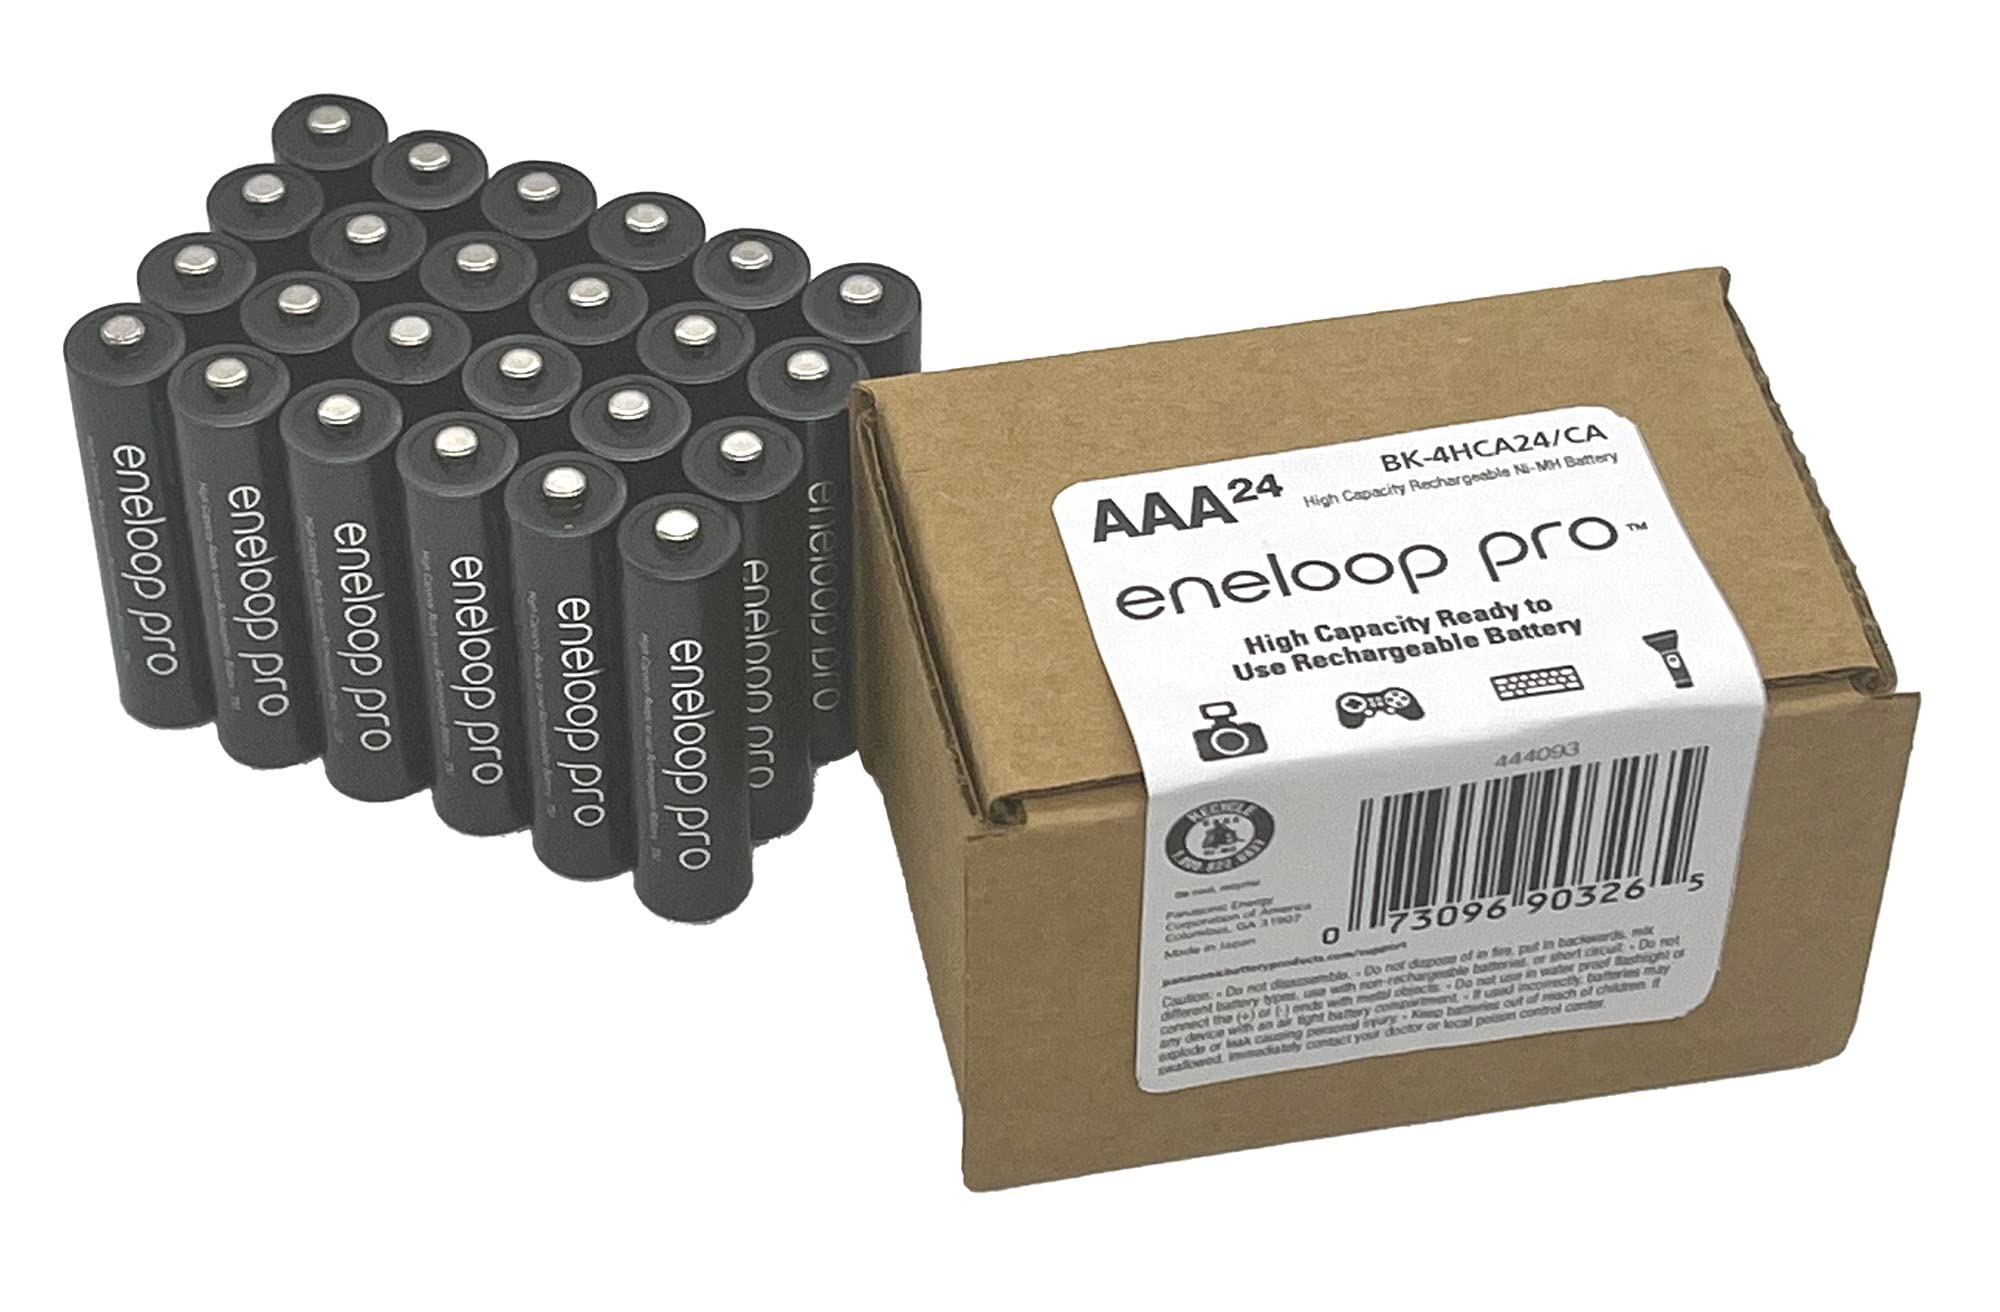 eneloop Panasonic BK-4HCA24/CA pro AAA High-Capacity Ni-MH Pre-Charged Rechargeable Batteries, 24-Battery Pack